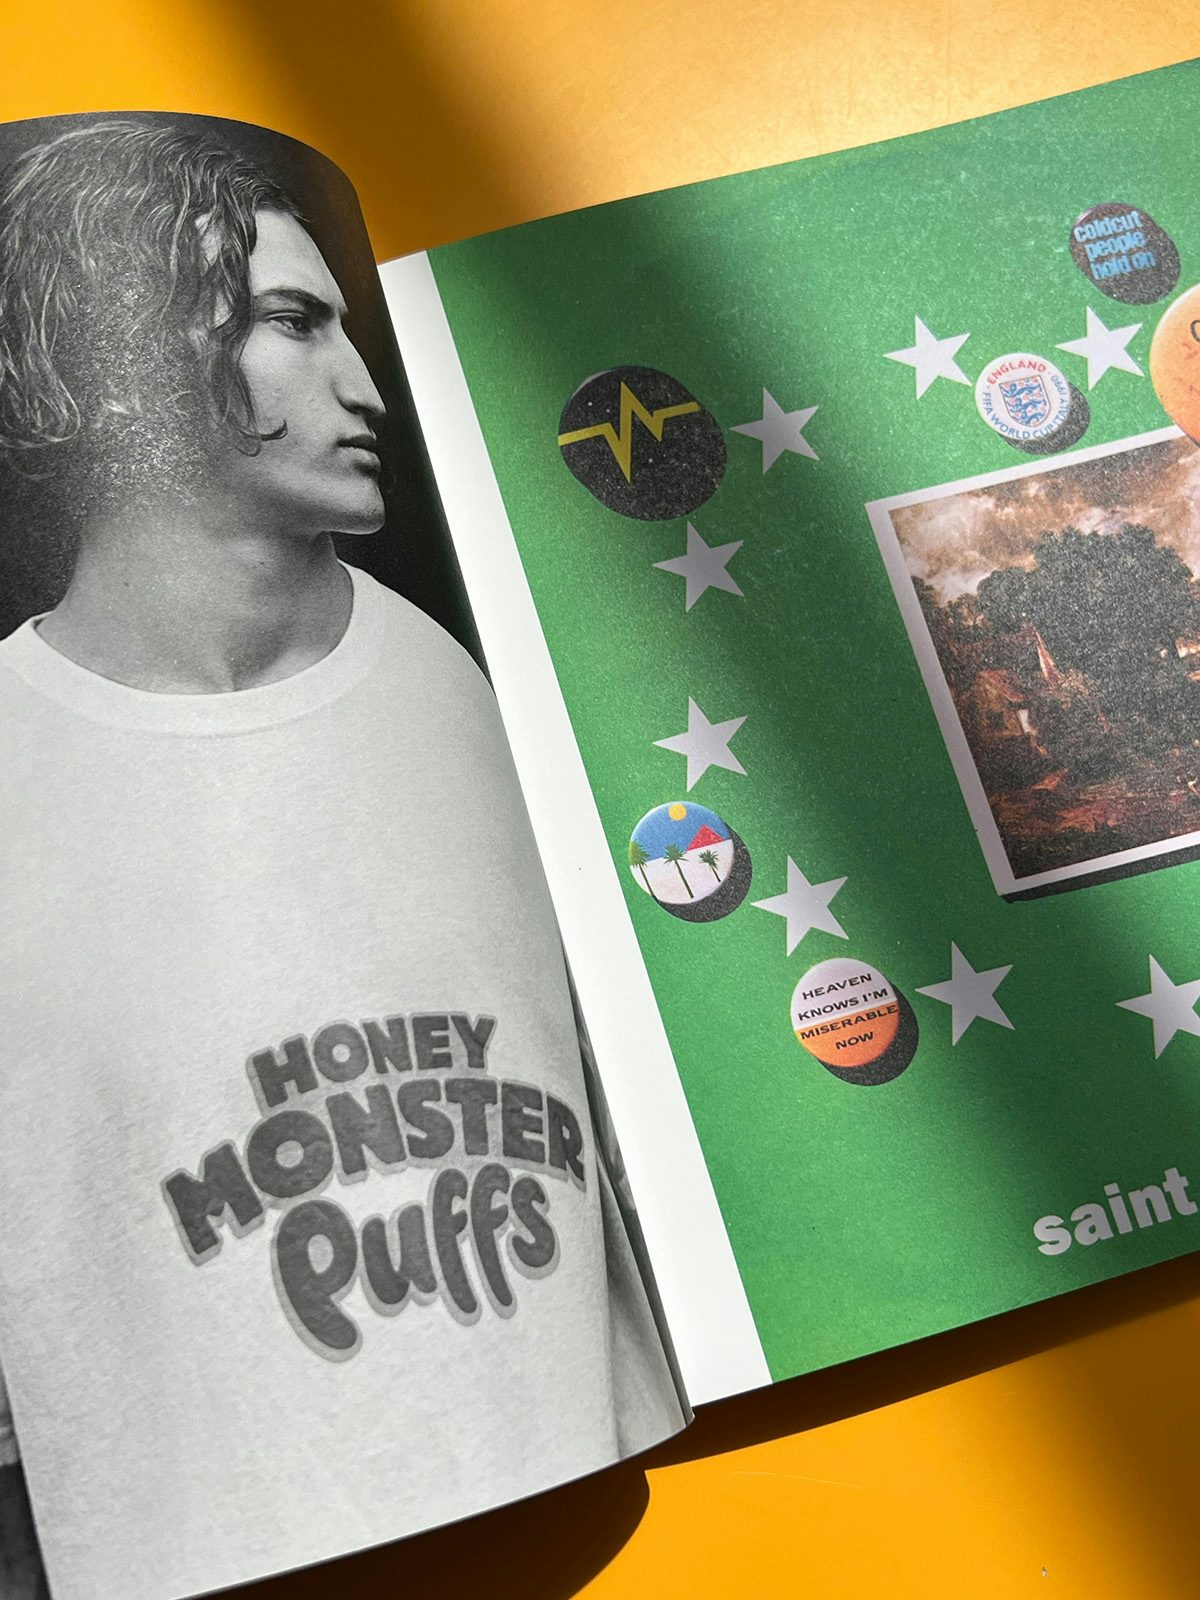 Photo of Alasdair McLellan's Home and Away photo books on an orange tabletop, showing a black and white portrait of a person with curly chin-length hair wearing a t-shirt that reads 'Honey Monster Puffs', next to another photograph of badges on a green background